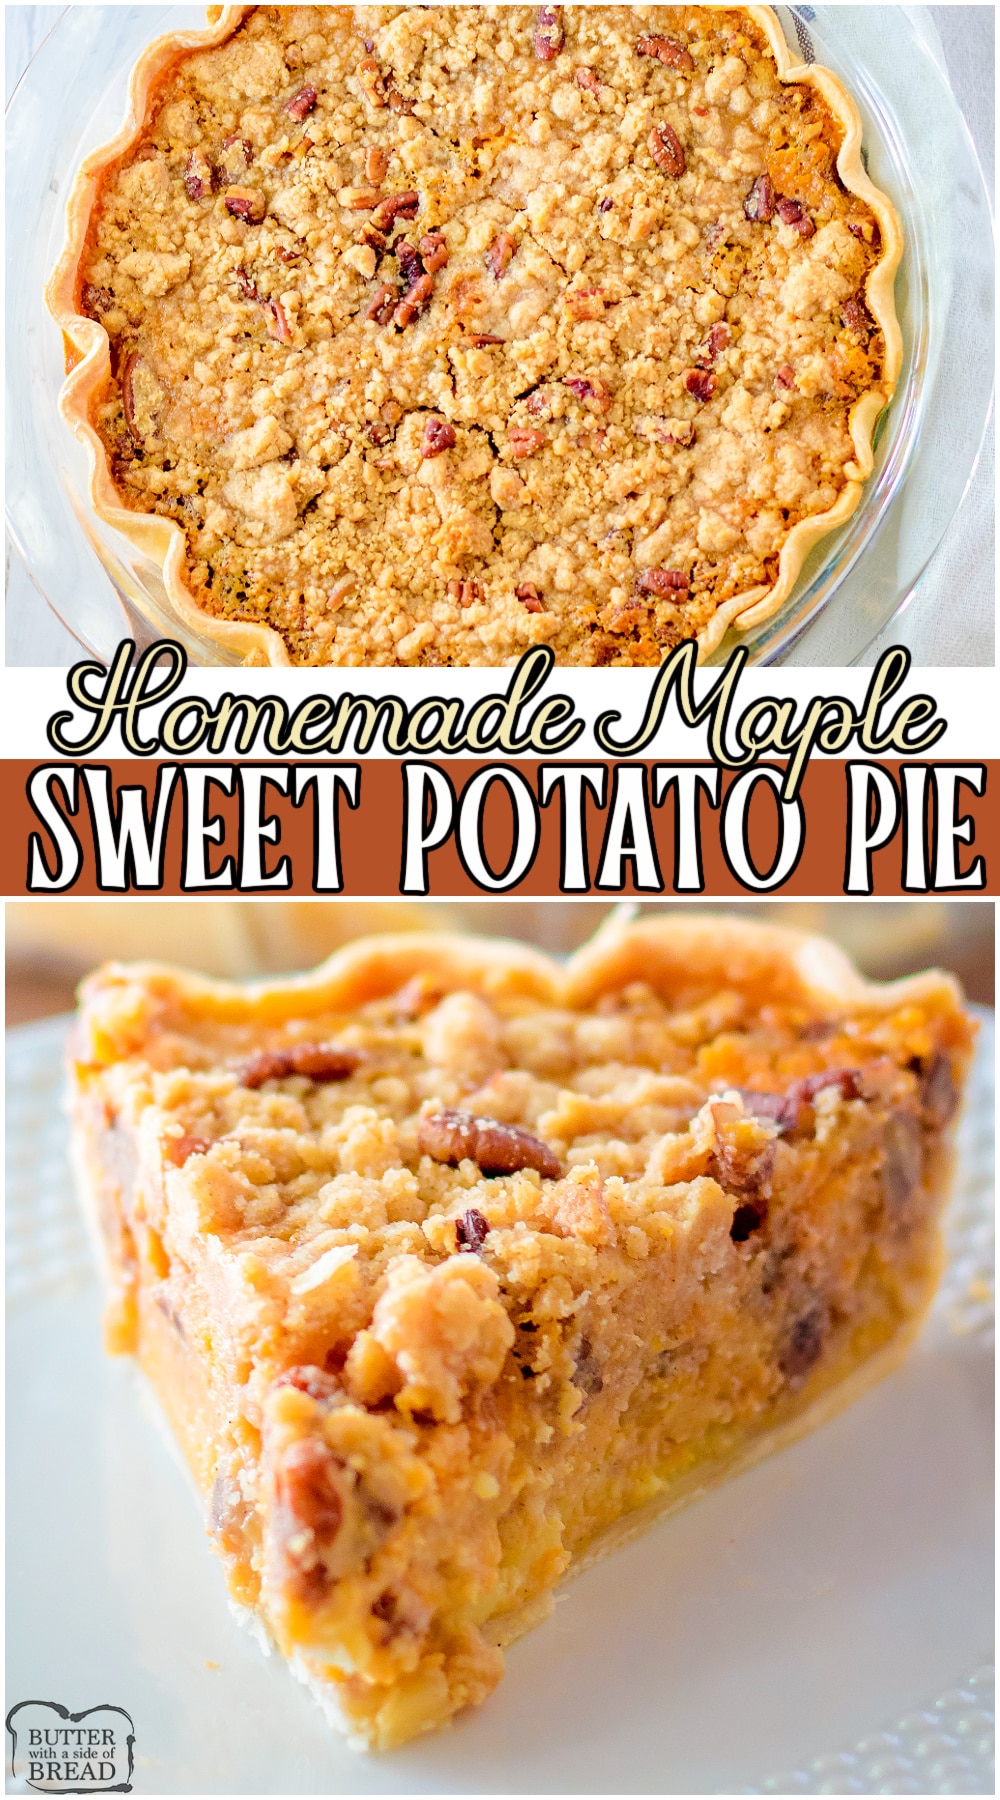 Maple sweet potato pie made with a homemade flaky crust, pecans, sweet potatoes & brown sugar cinnamon streusel topping! Fantastic flavor in this classic sweet potato pie recipe that everyone loves! 